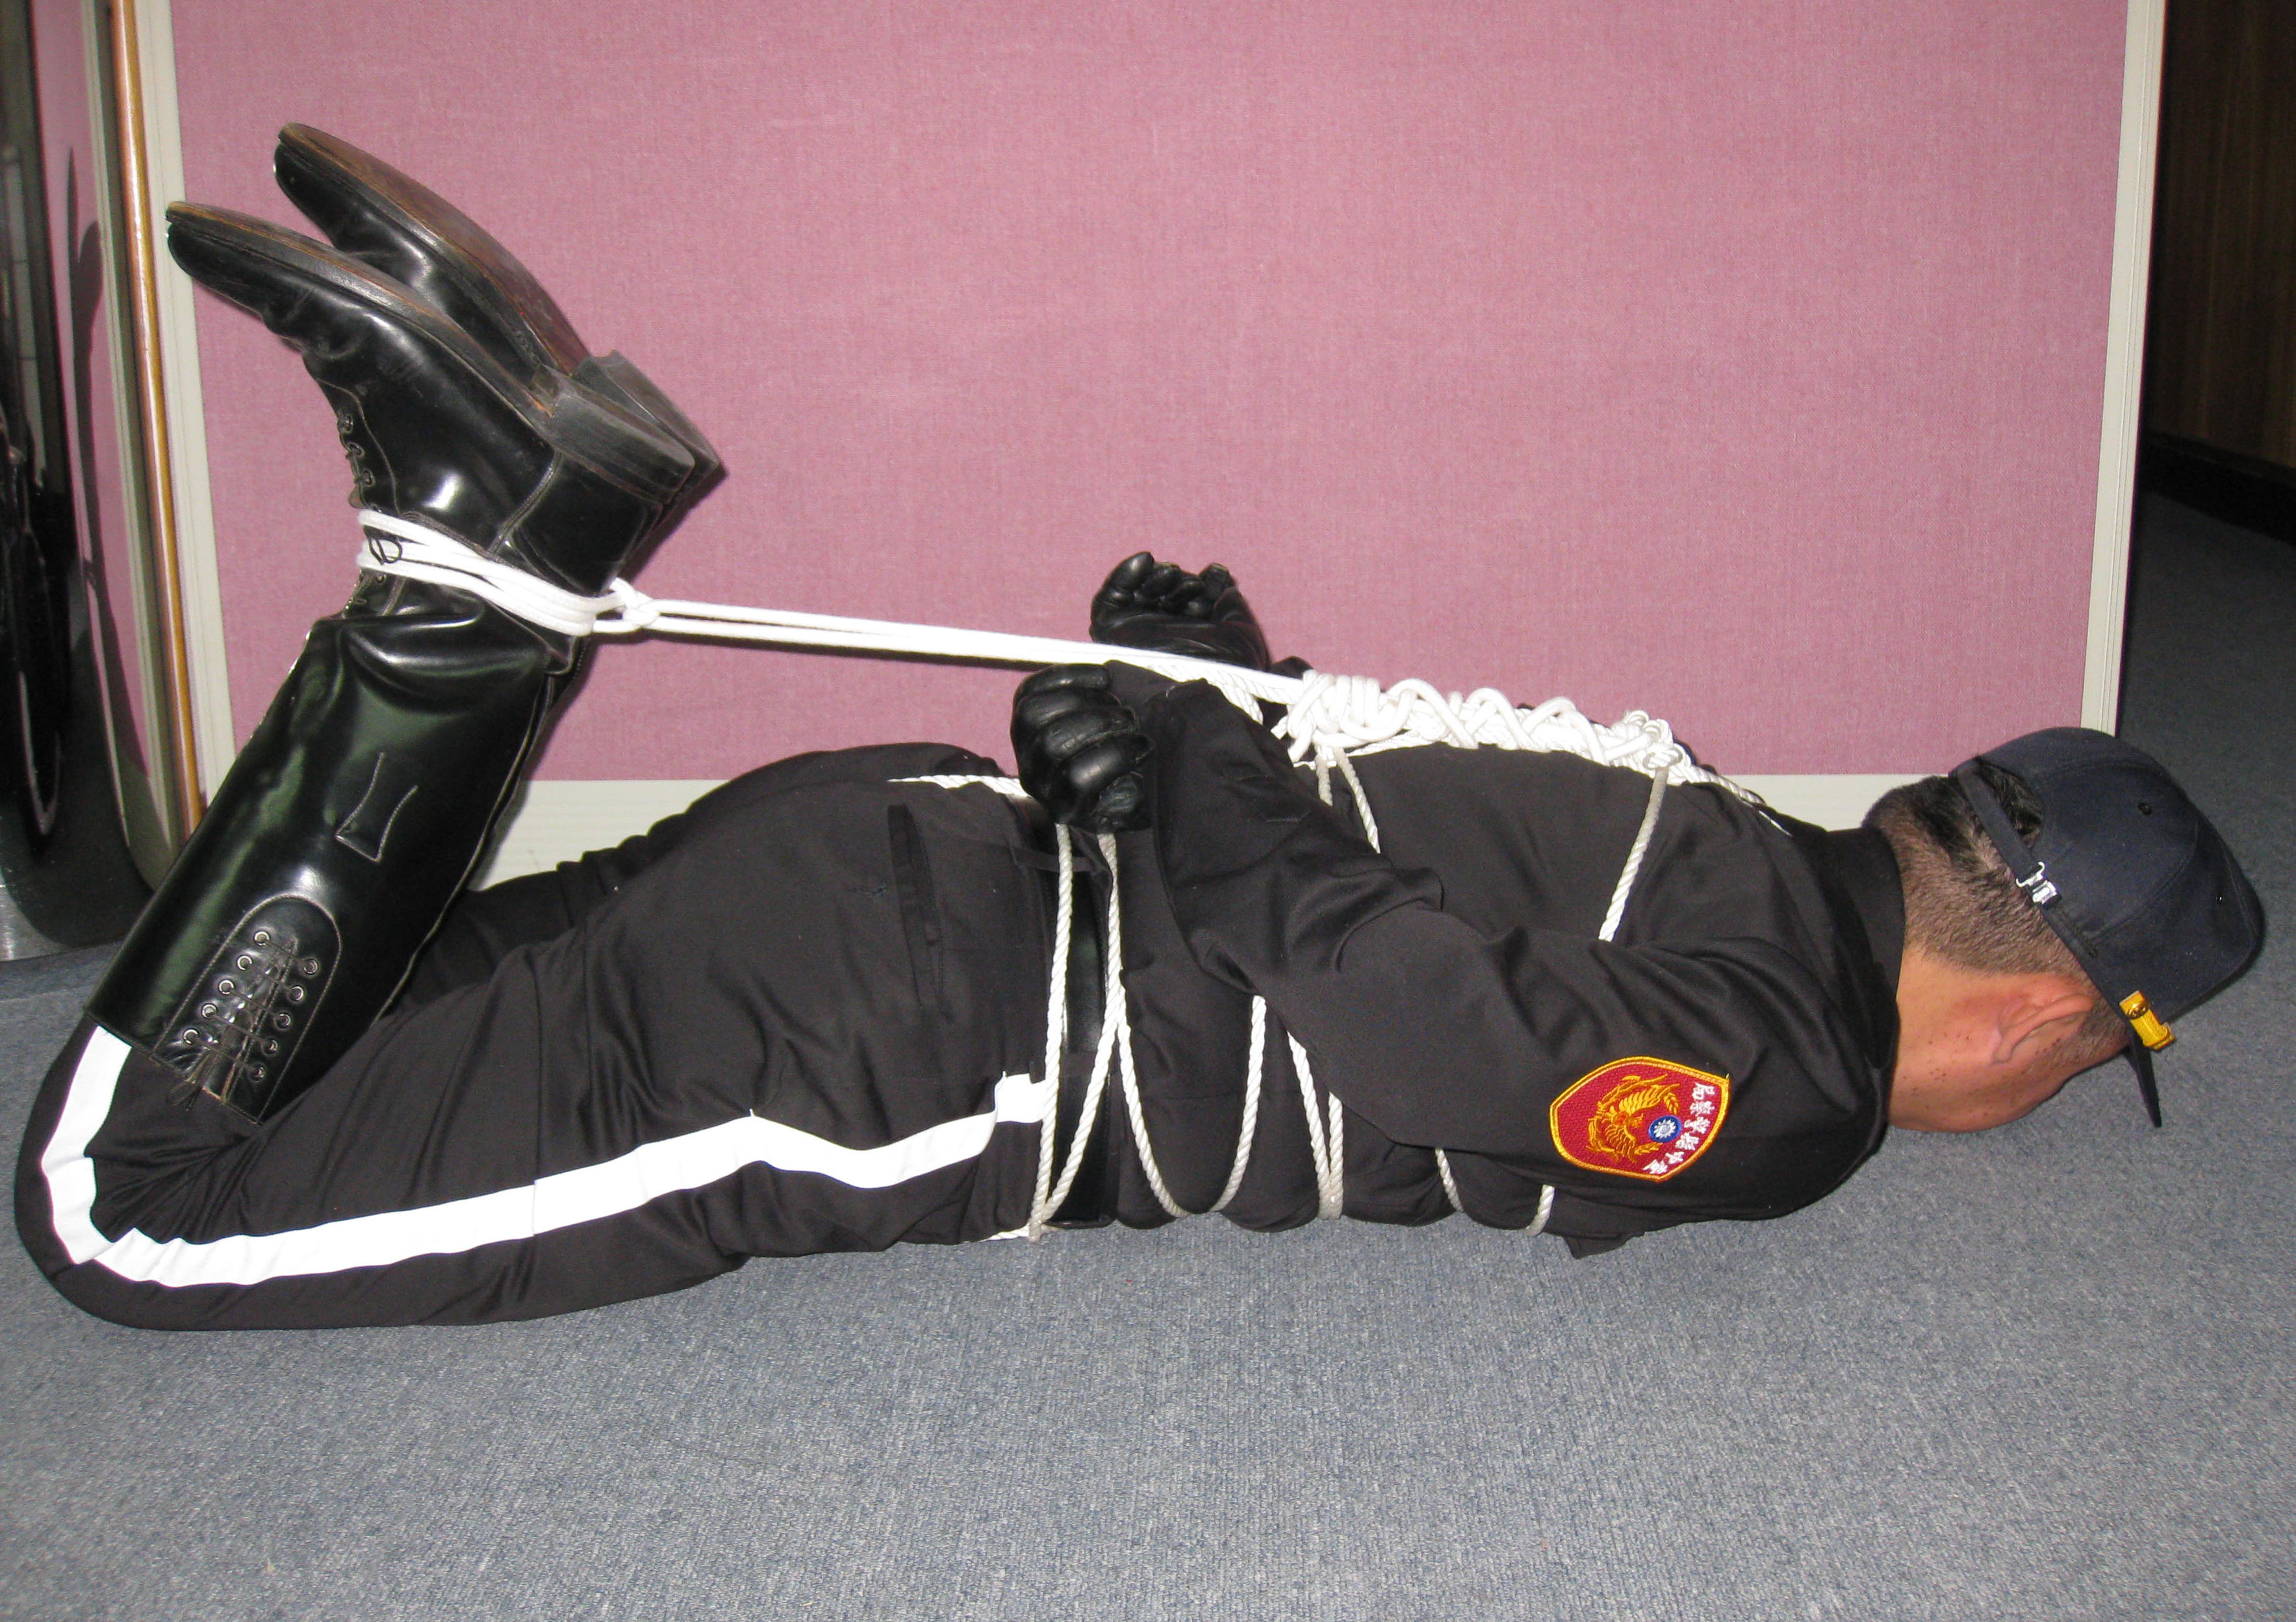 Officer in boots and gloves hogtied